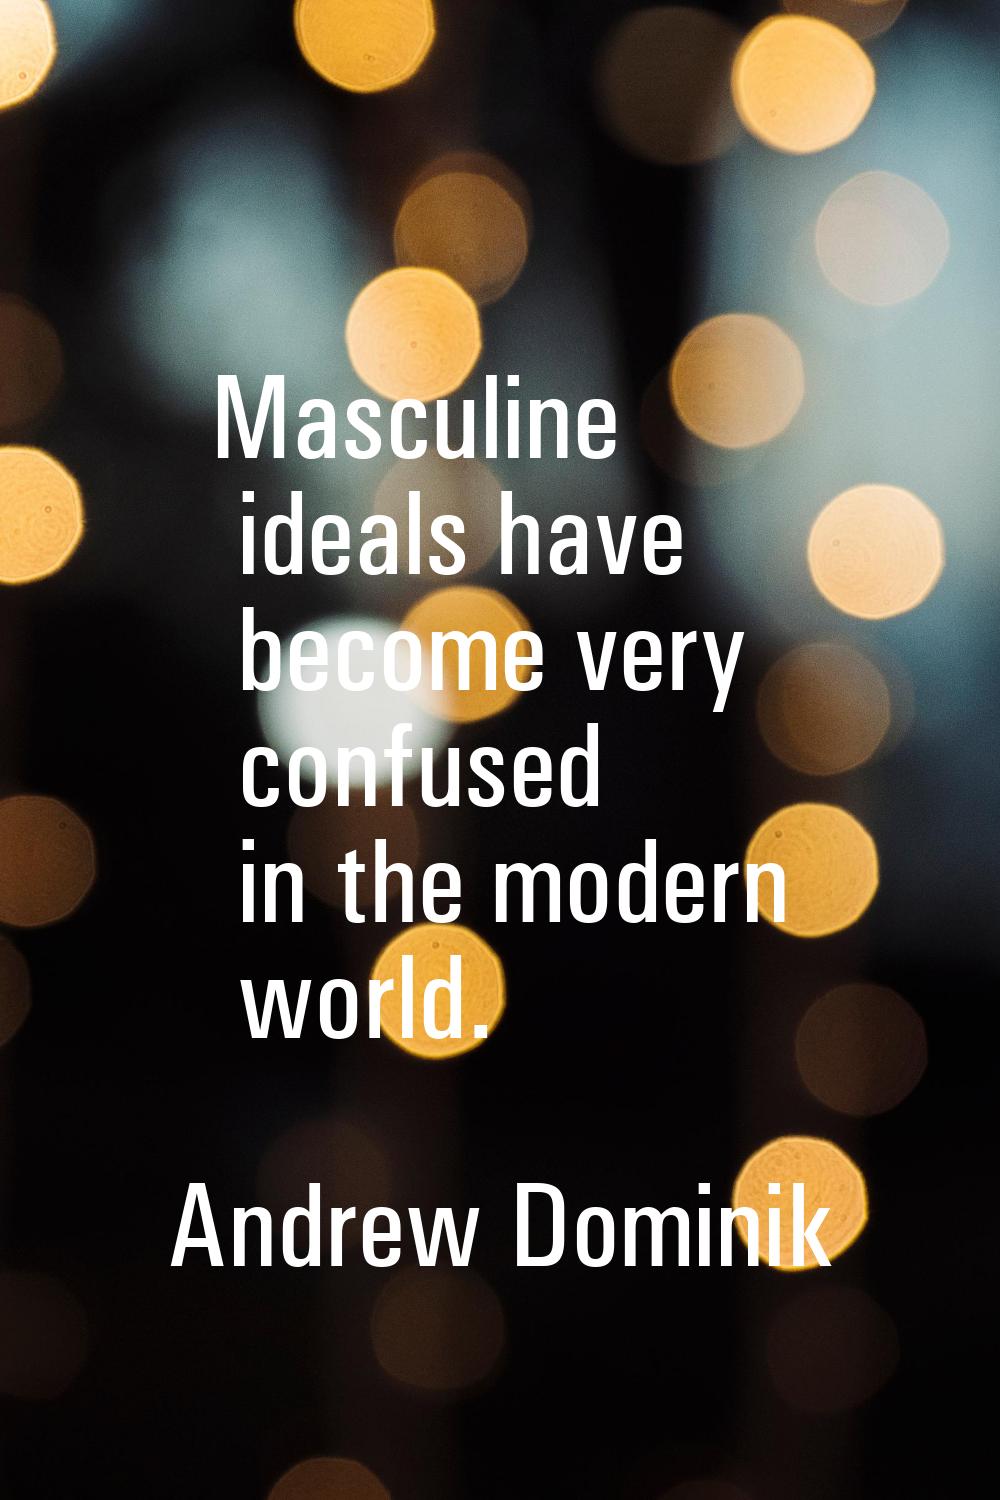 Masculine ideals have become very confused in the modern world.